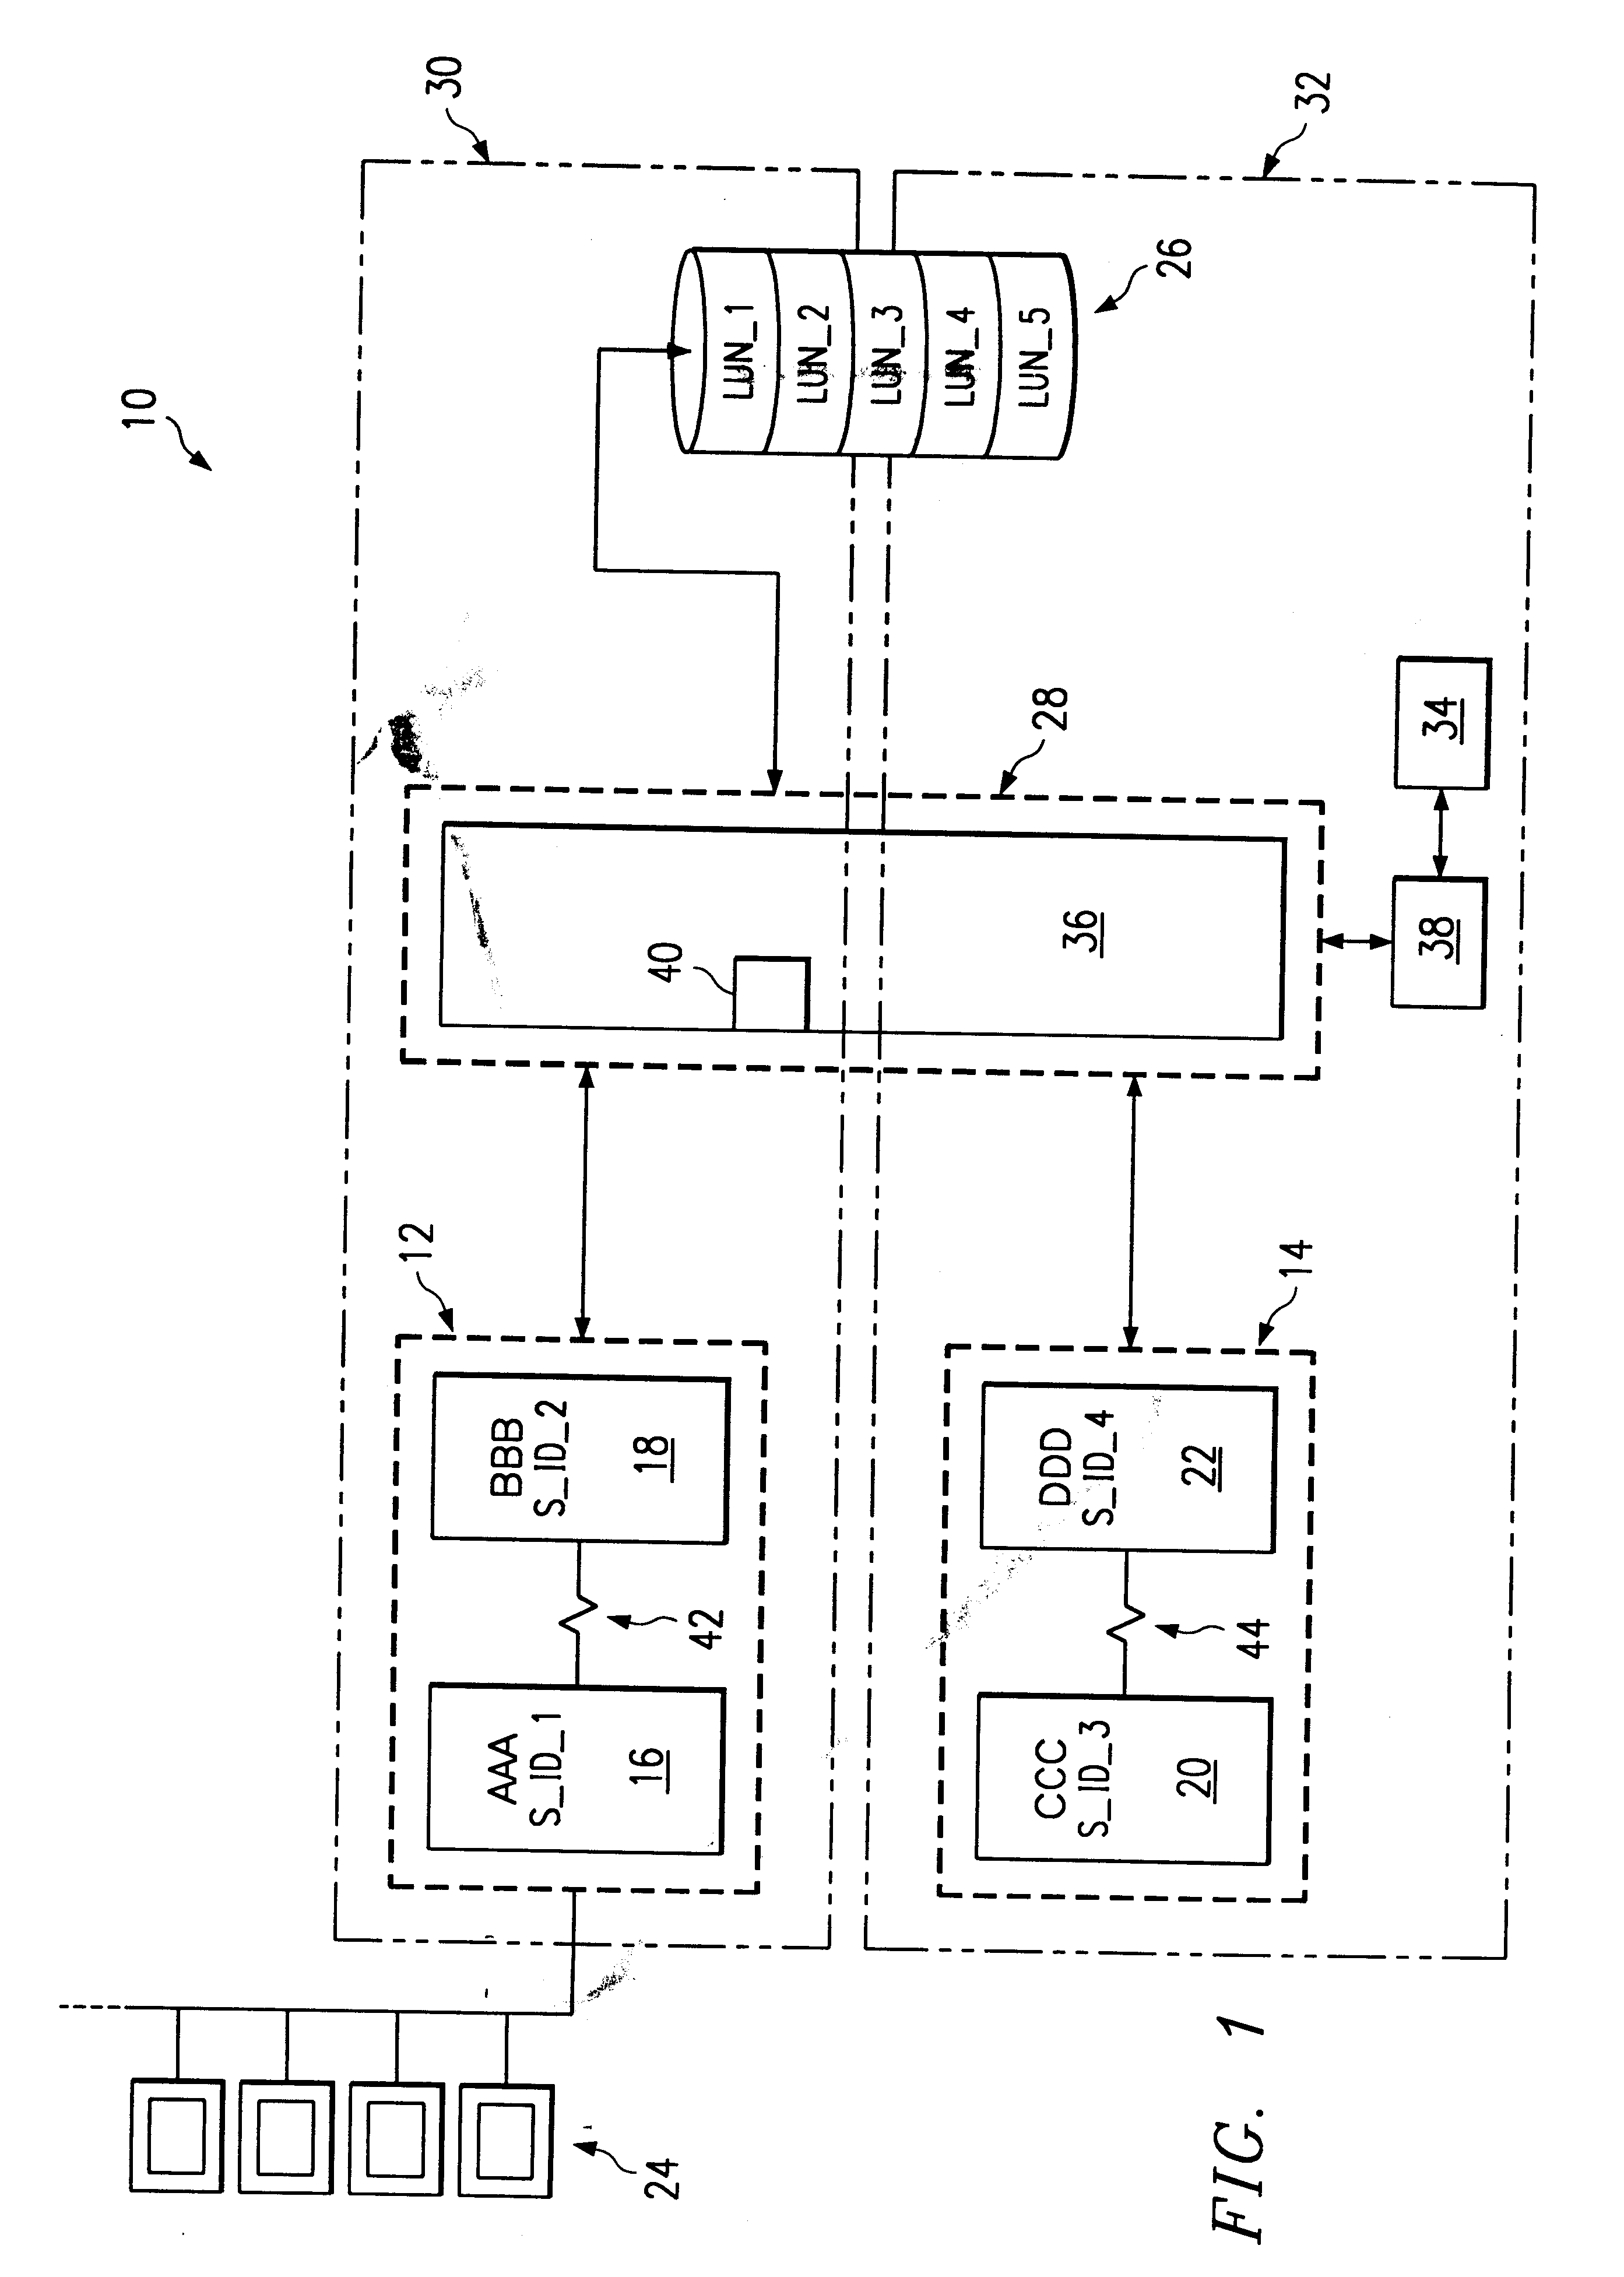 System and method for managing storage resources in a clustered computing environment